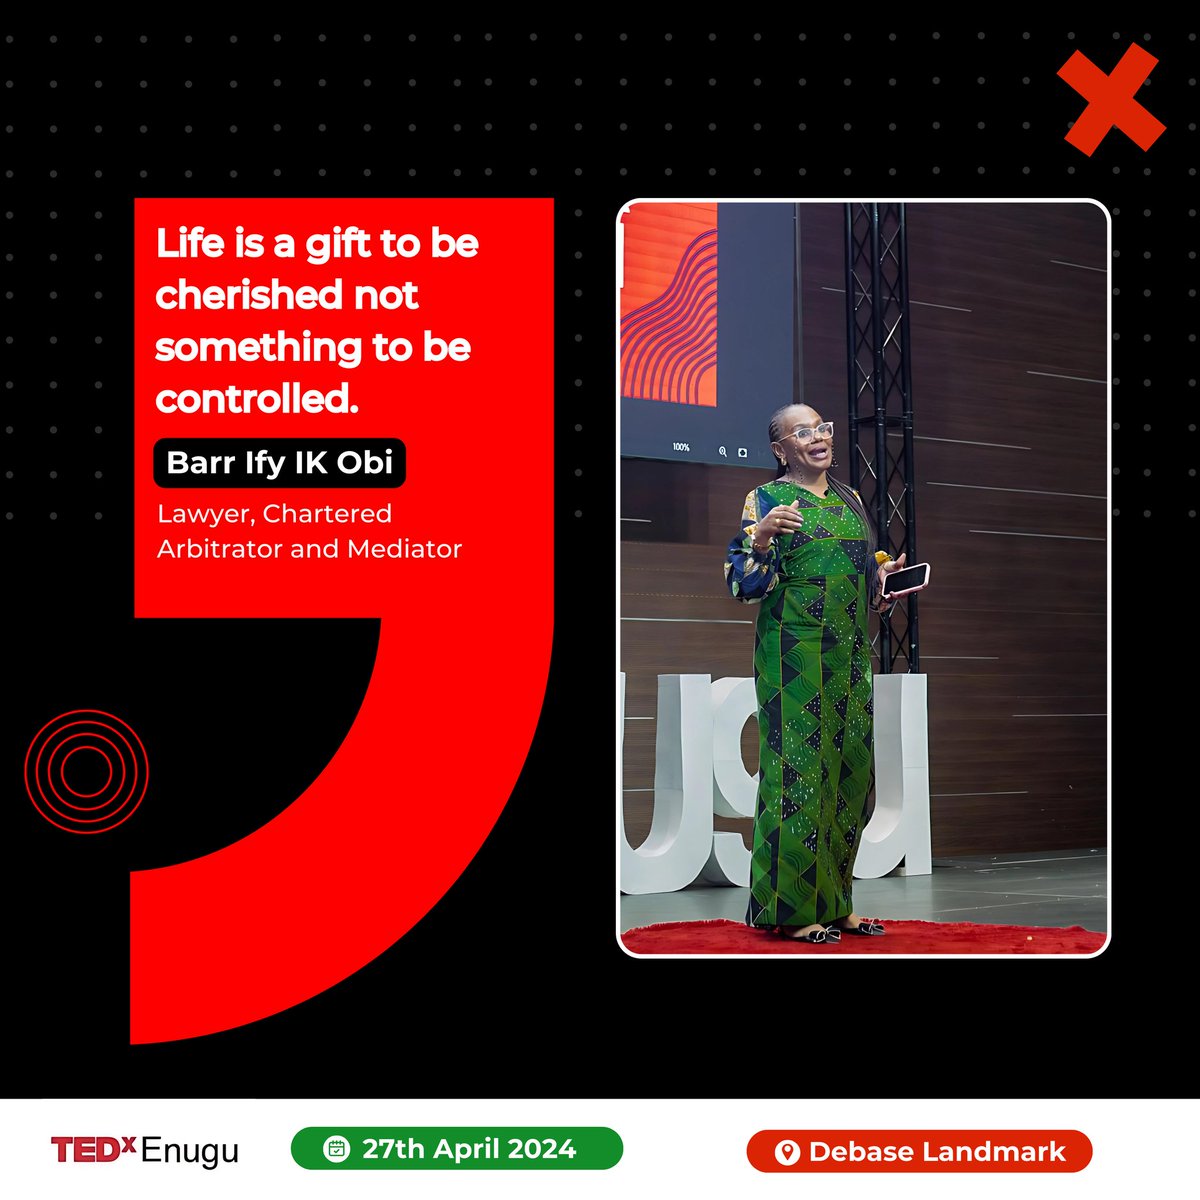 'Life is a gift to be cherished, not something to be controlled.' - Barr. Ify I'm Obi. Lawyer, Chartered Arbitrator and Mediator. #TED #Tedx #TedxEnugu